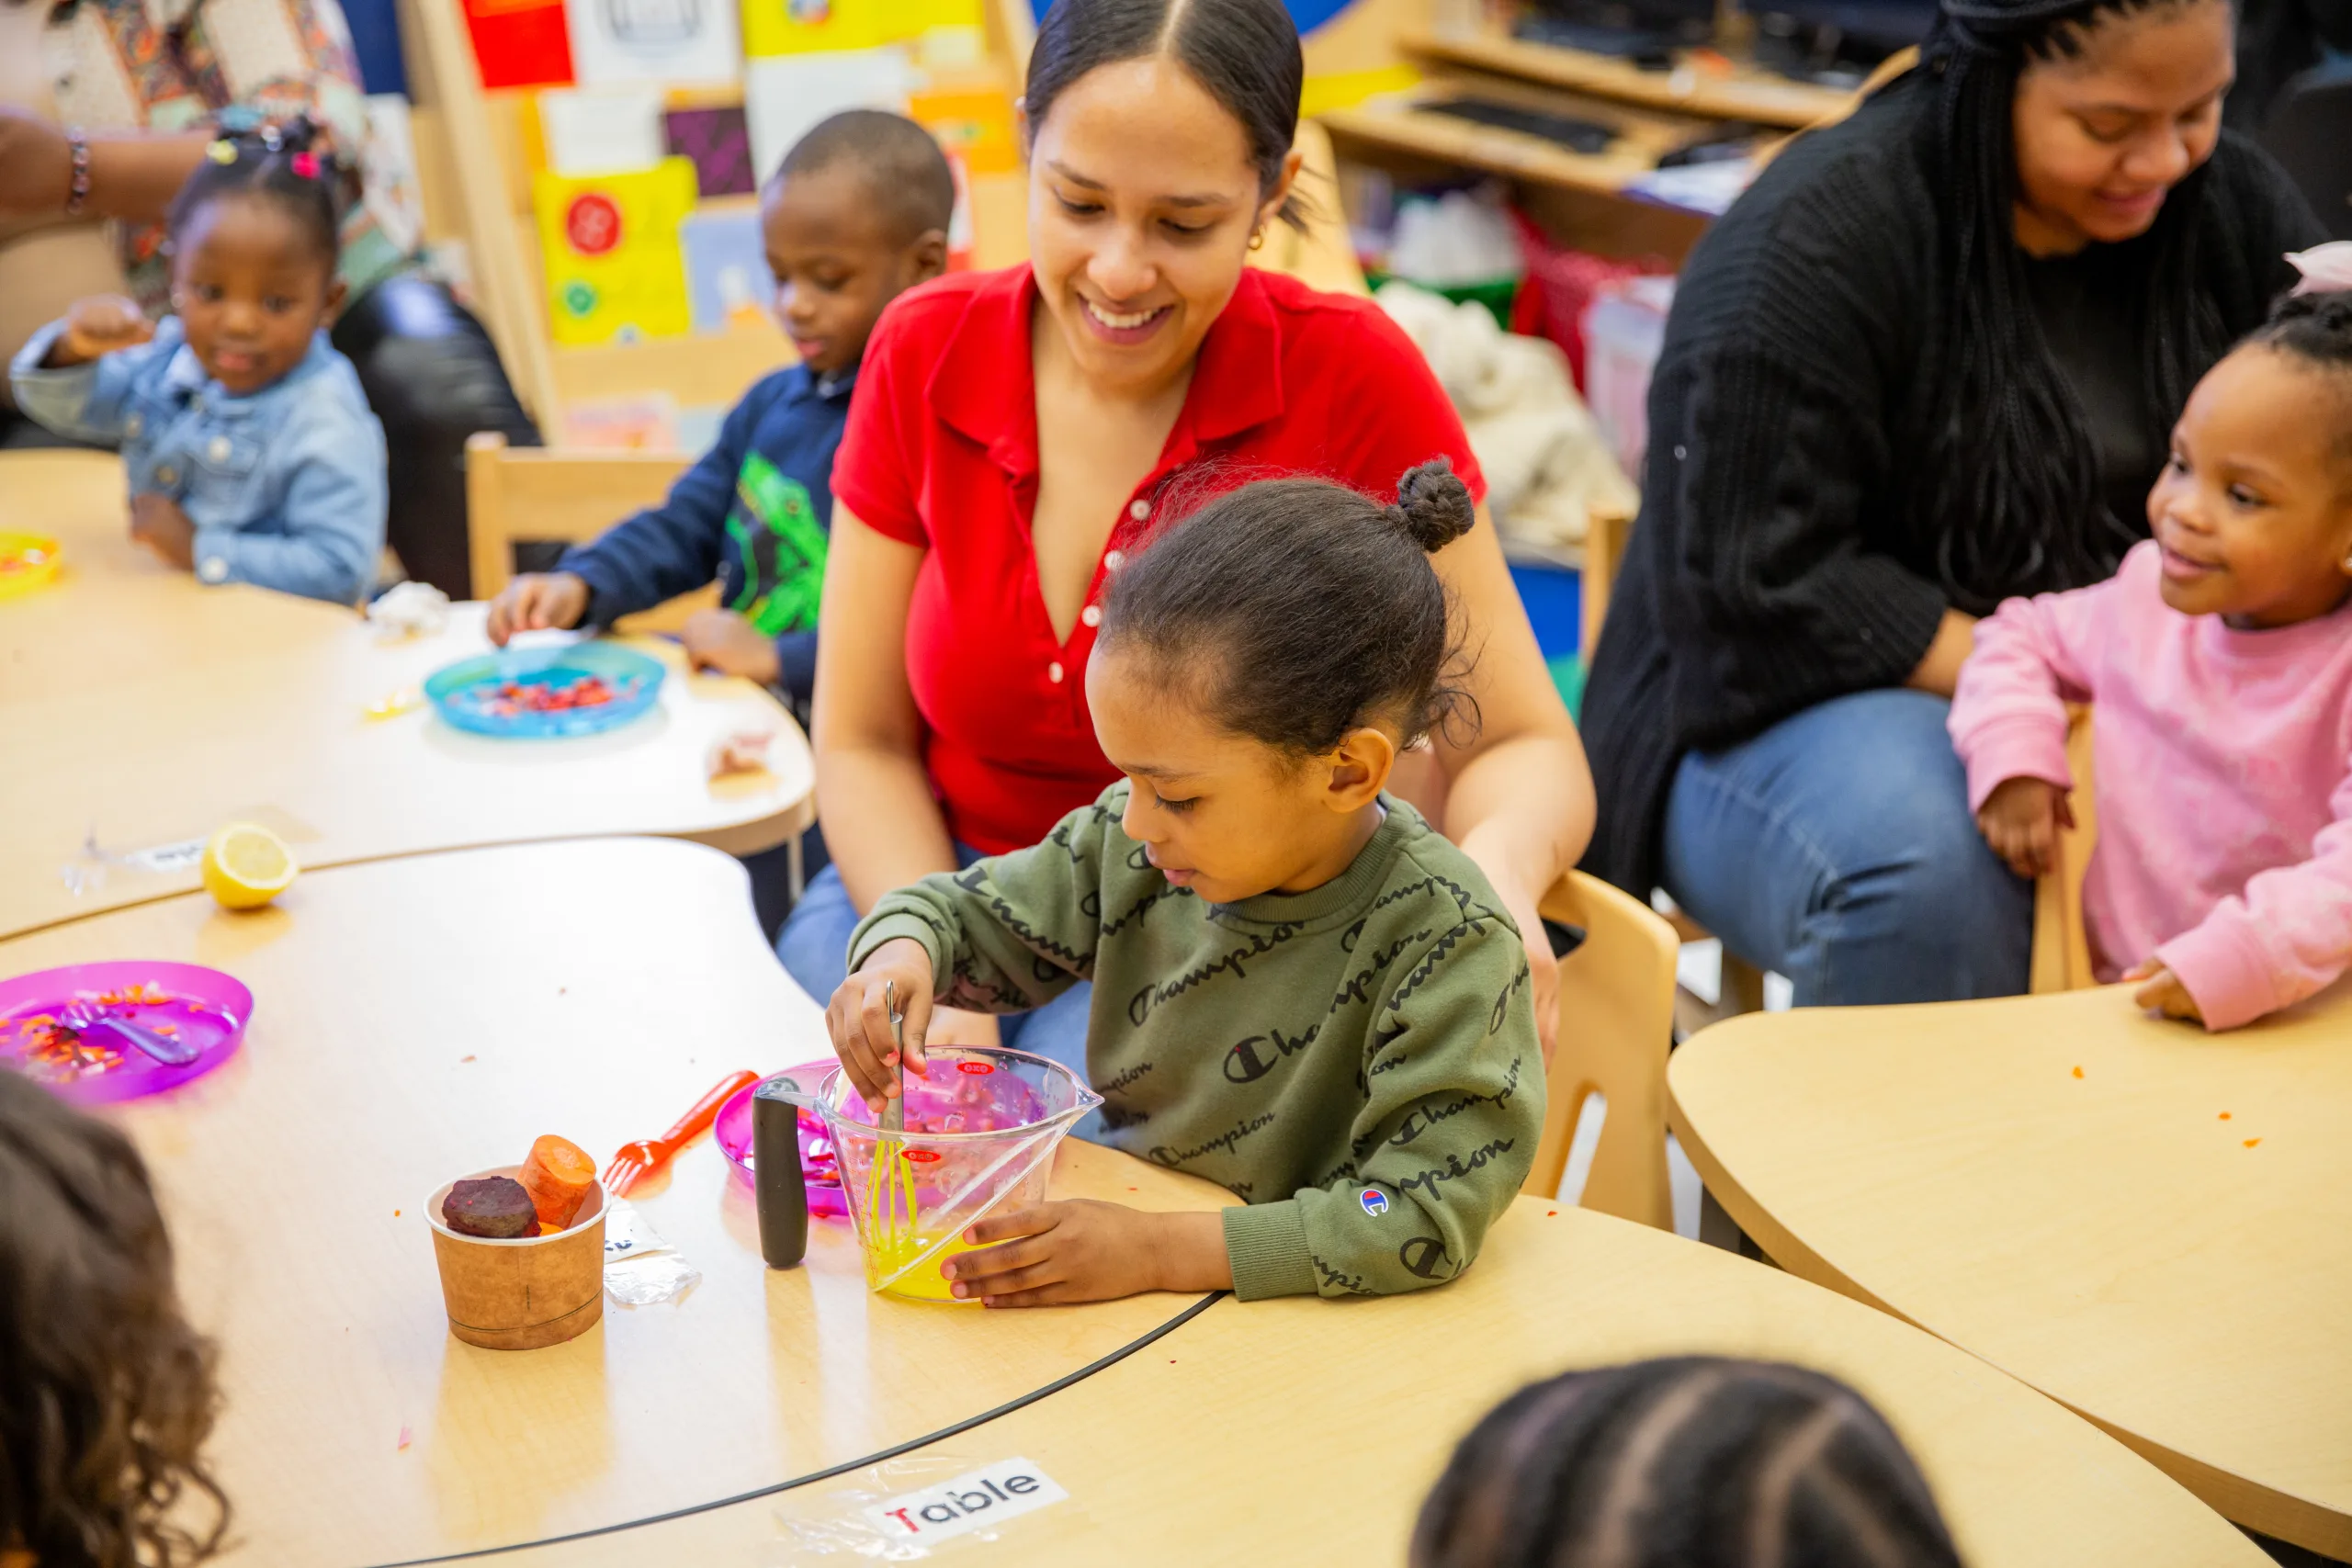 A child care provider helps a young child in an early learning classroom environment.